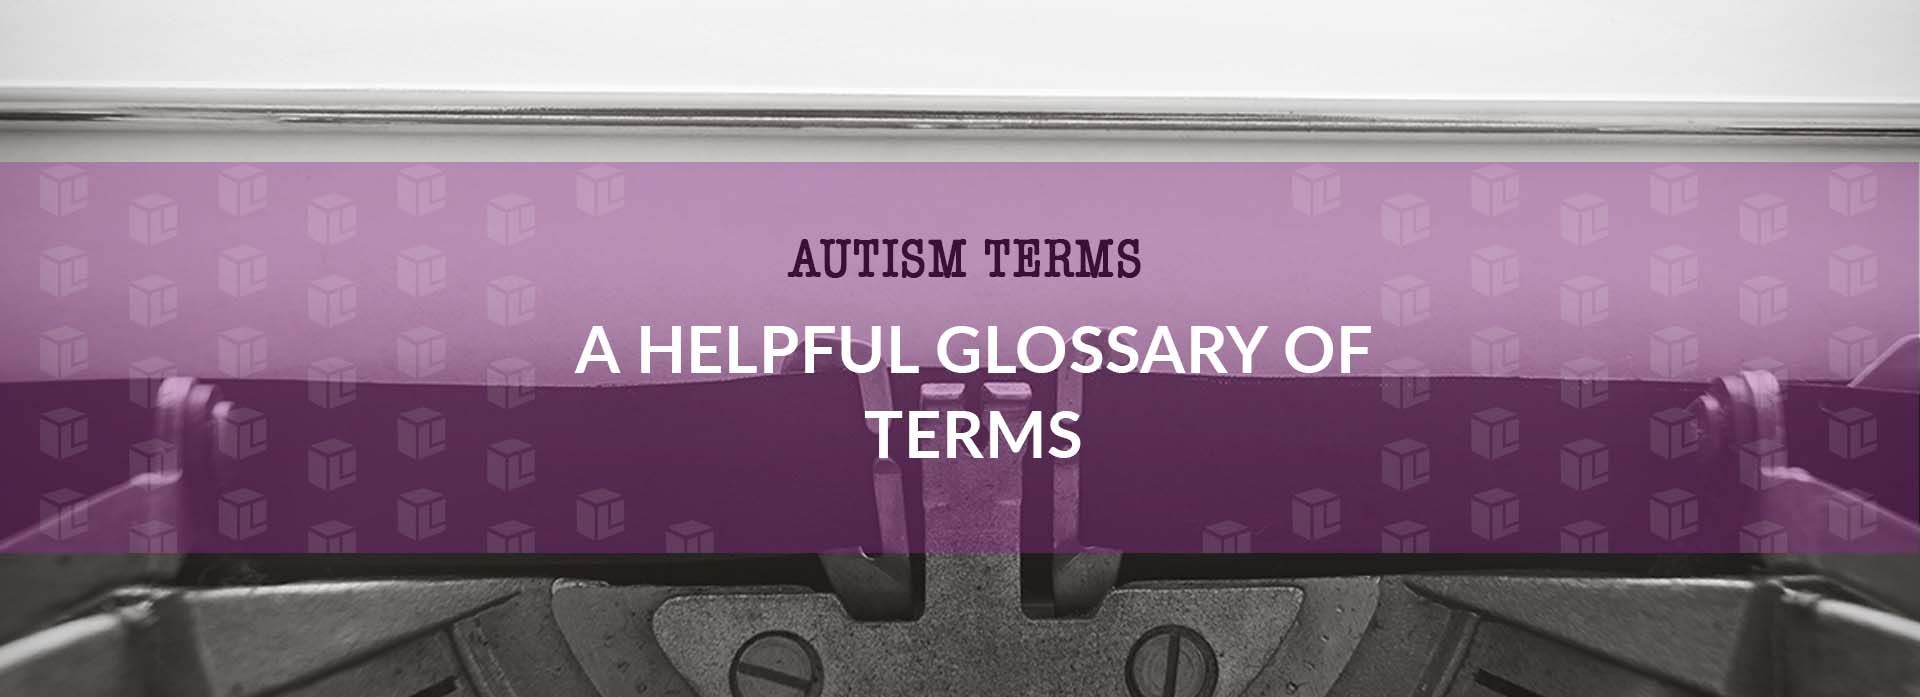 A Helpful Glossary Of Terms A Helpful Glossary Of Terms A Helpful Glossary Of Terms A Helpful Glossary Of Terms